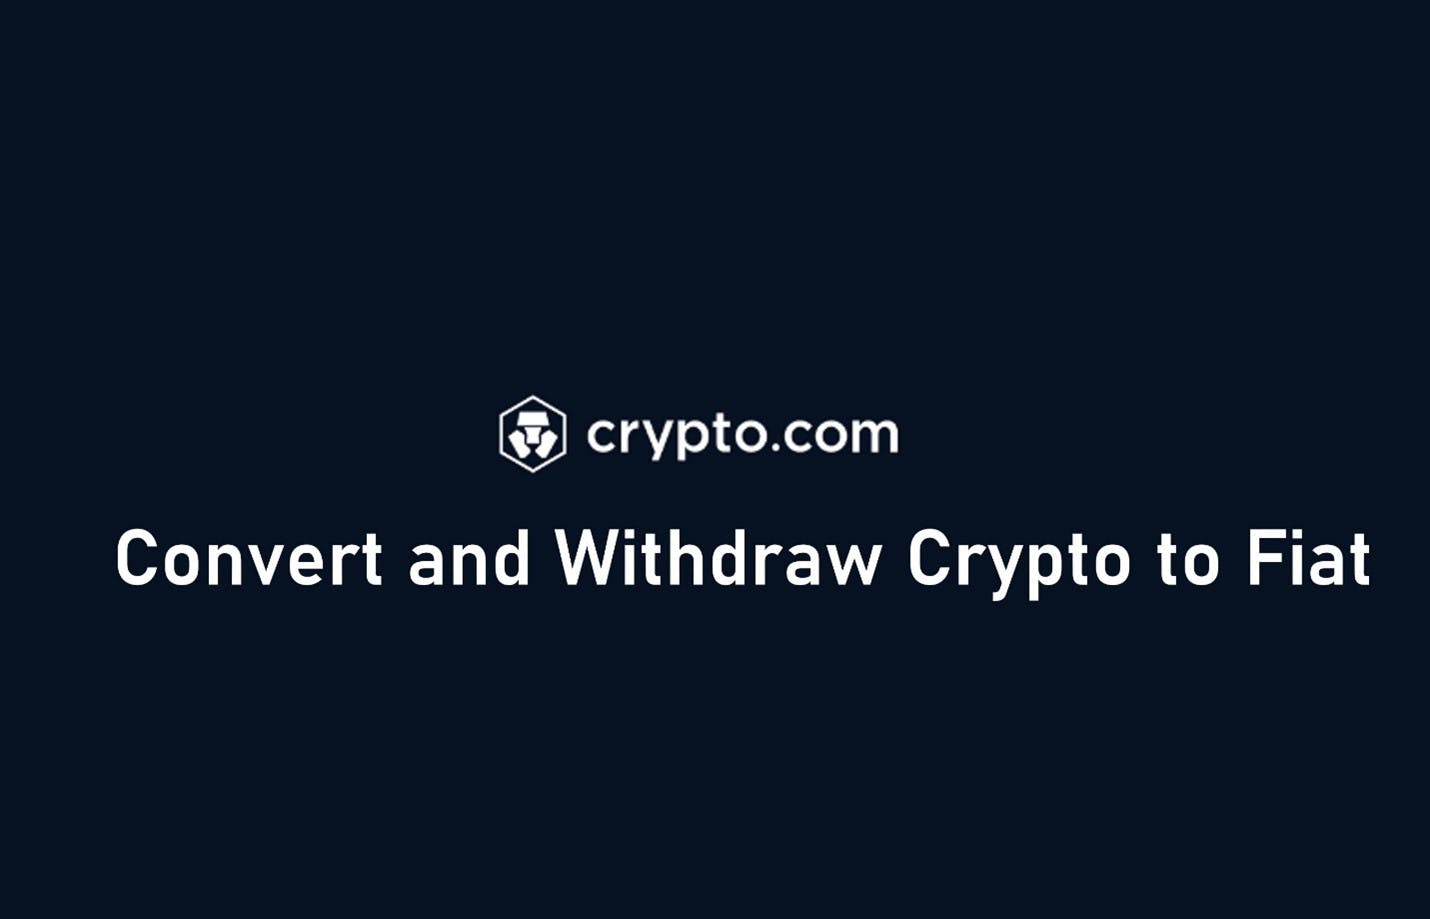 Convert and Withdraw Crypto to Fiat Using Crypto.com: Step-by-Step Guide